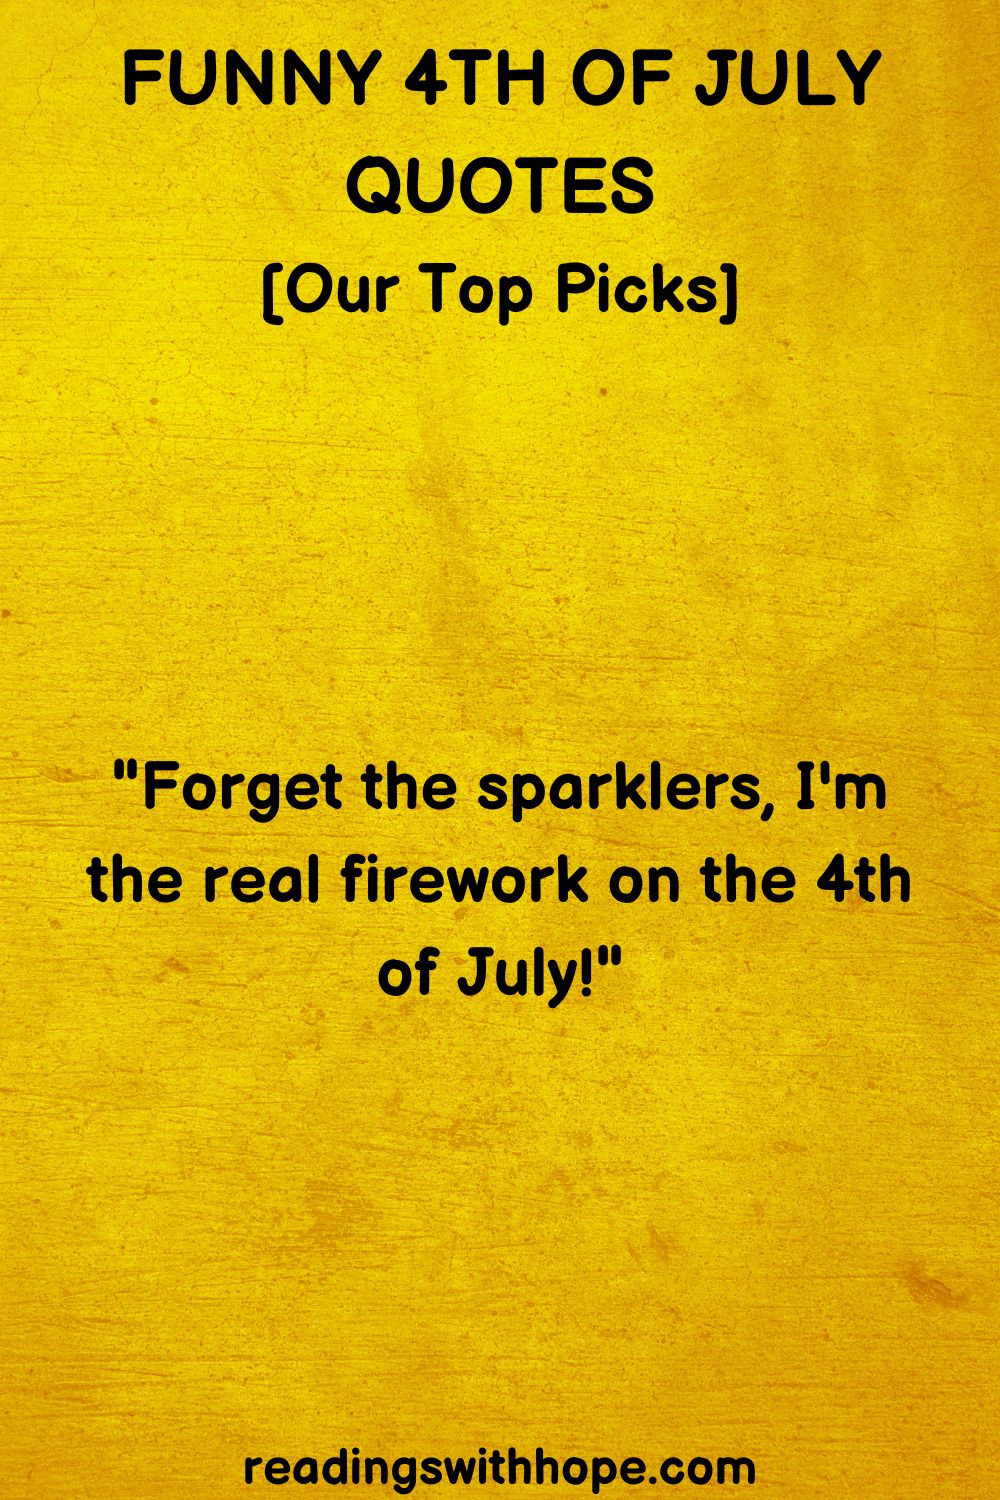 Funny 4th of July Quotes